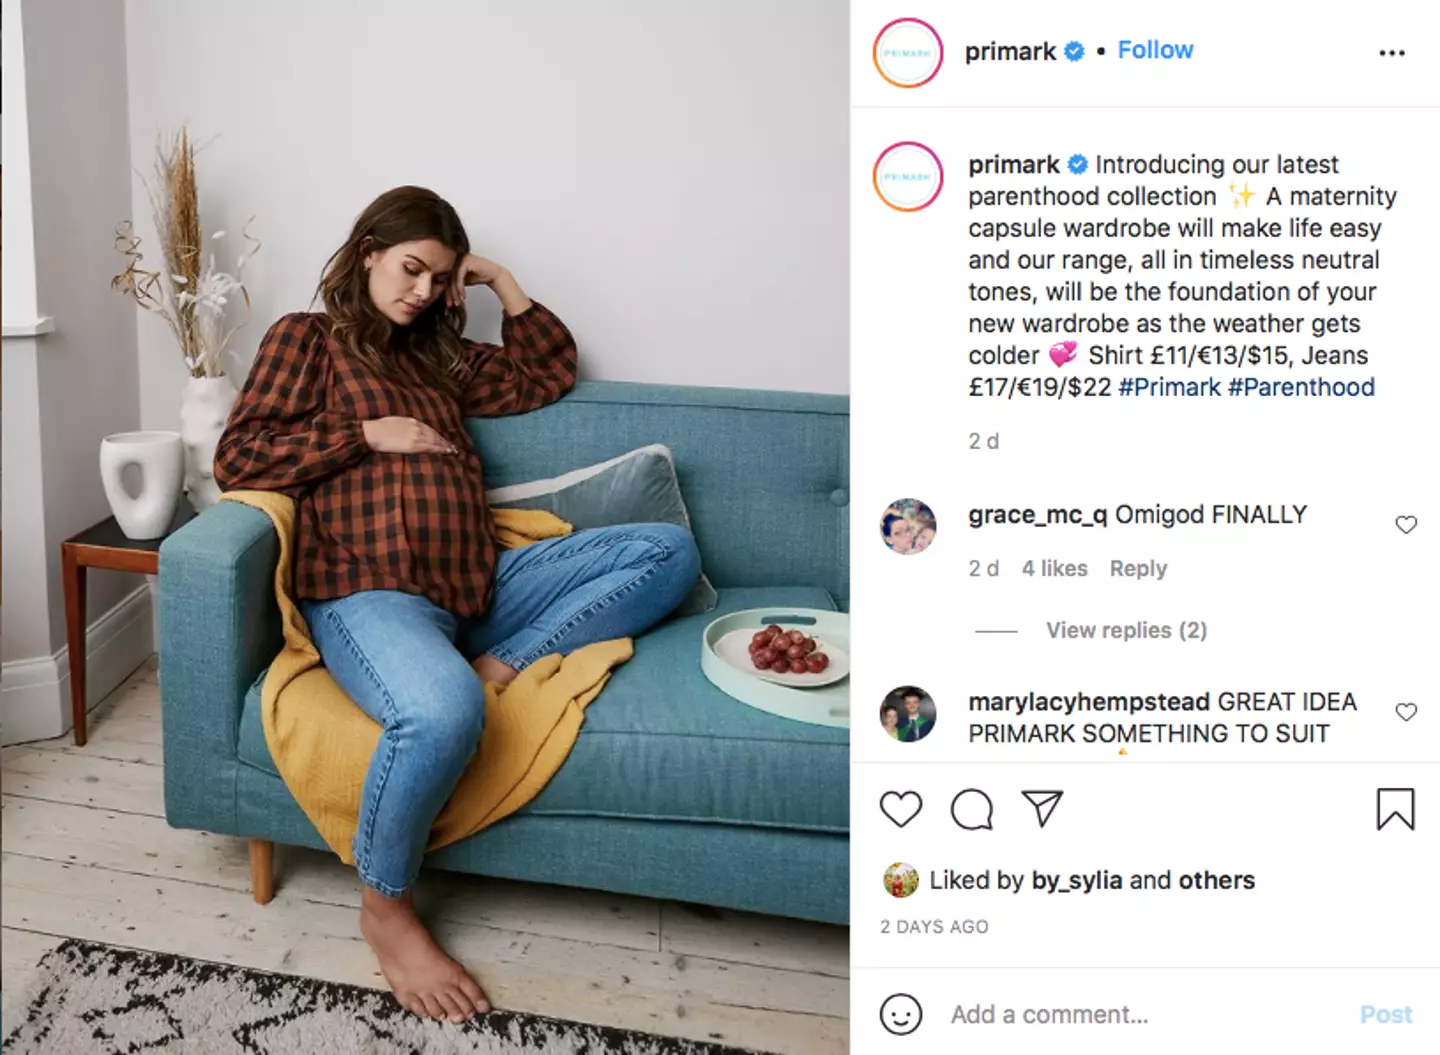 Primark shared this post, naming their new pregnancy collection (